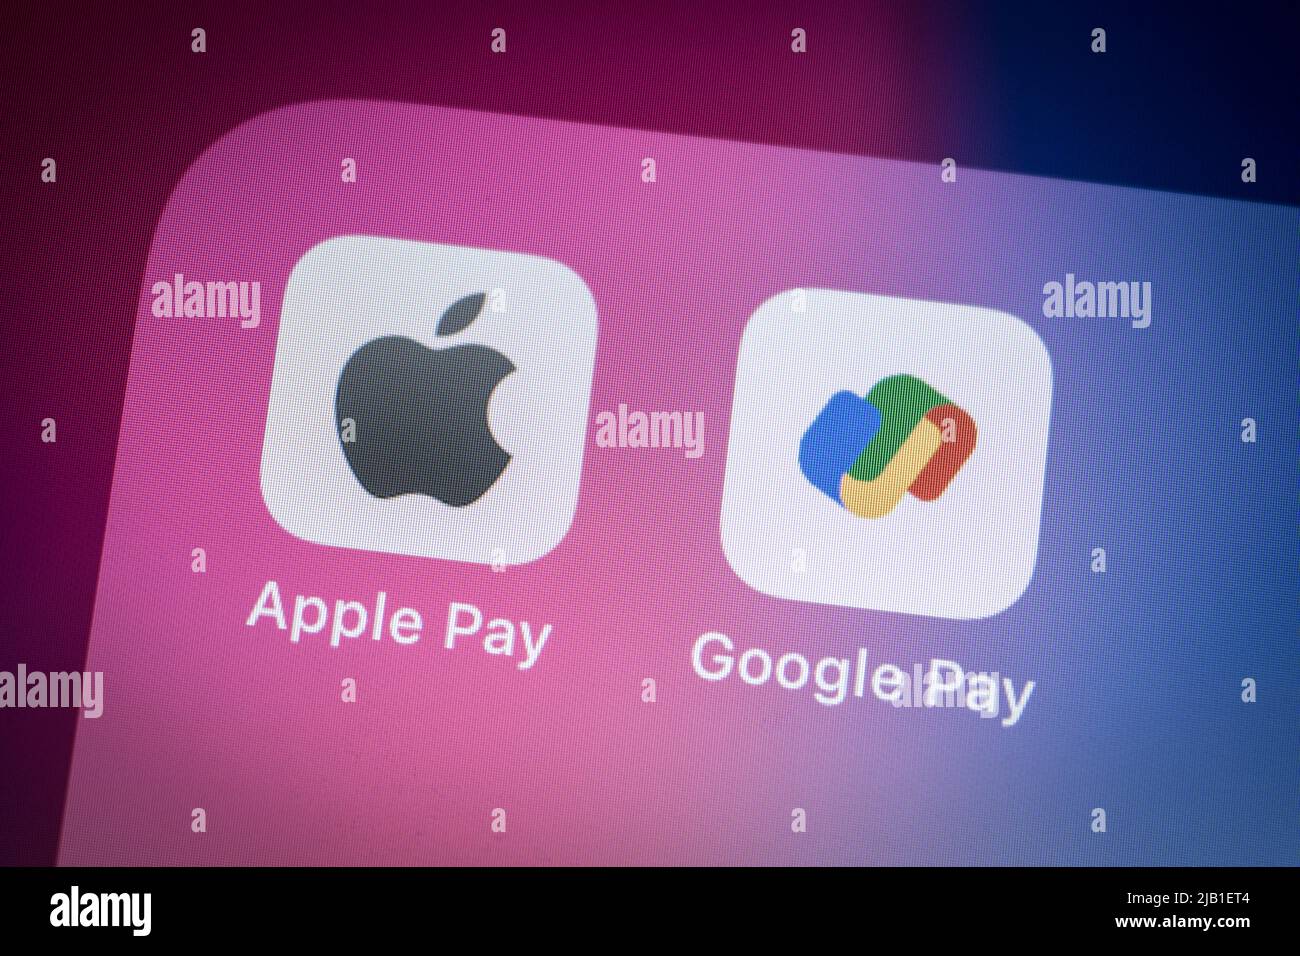 https://c8.alamy.com/comp/2JB1ET4/kumamoto-japan-may-01-2021-apple-pay-and-google-pay-icons-on-iphone-screen-a-mobile-payment-and-digital-wallet-service-concept-2JB1ET4.jpg